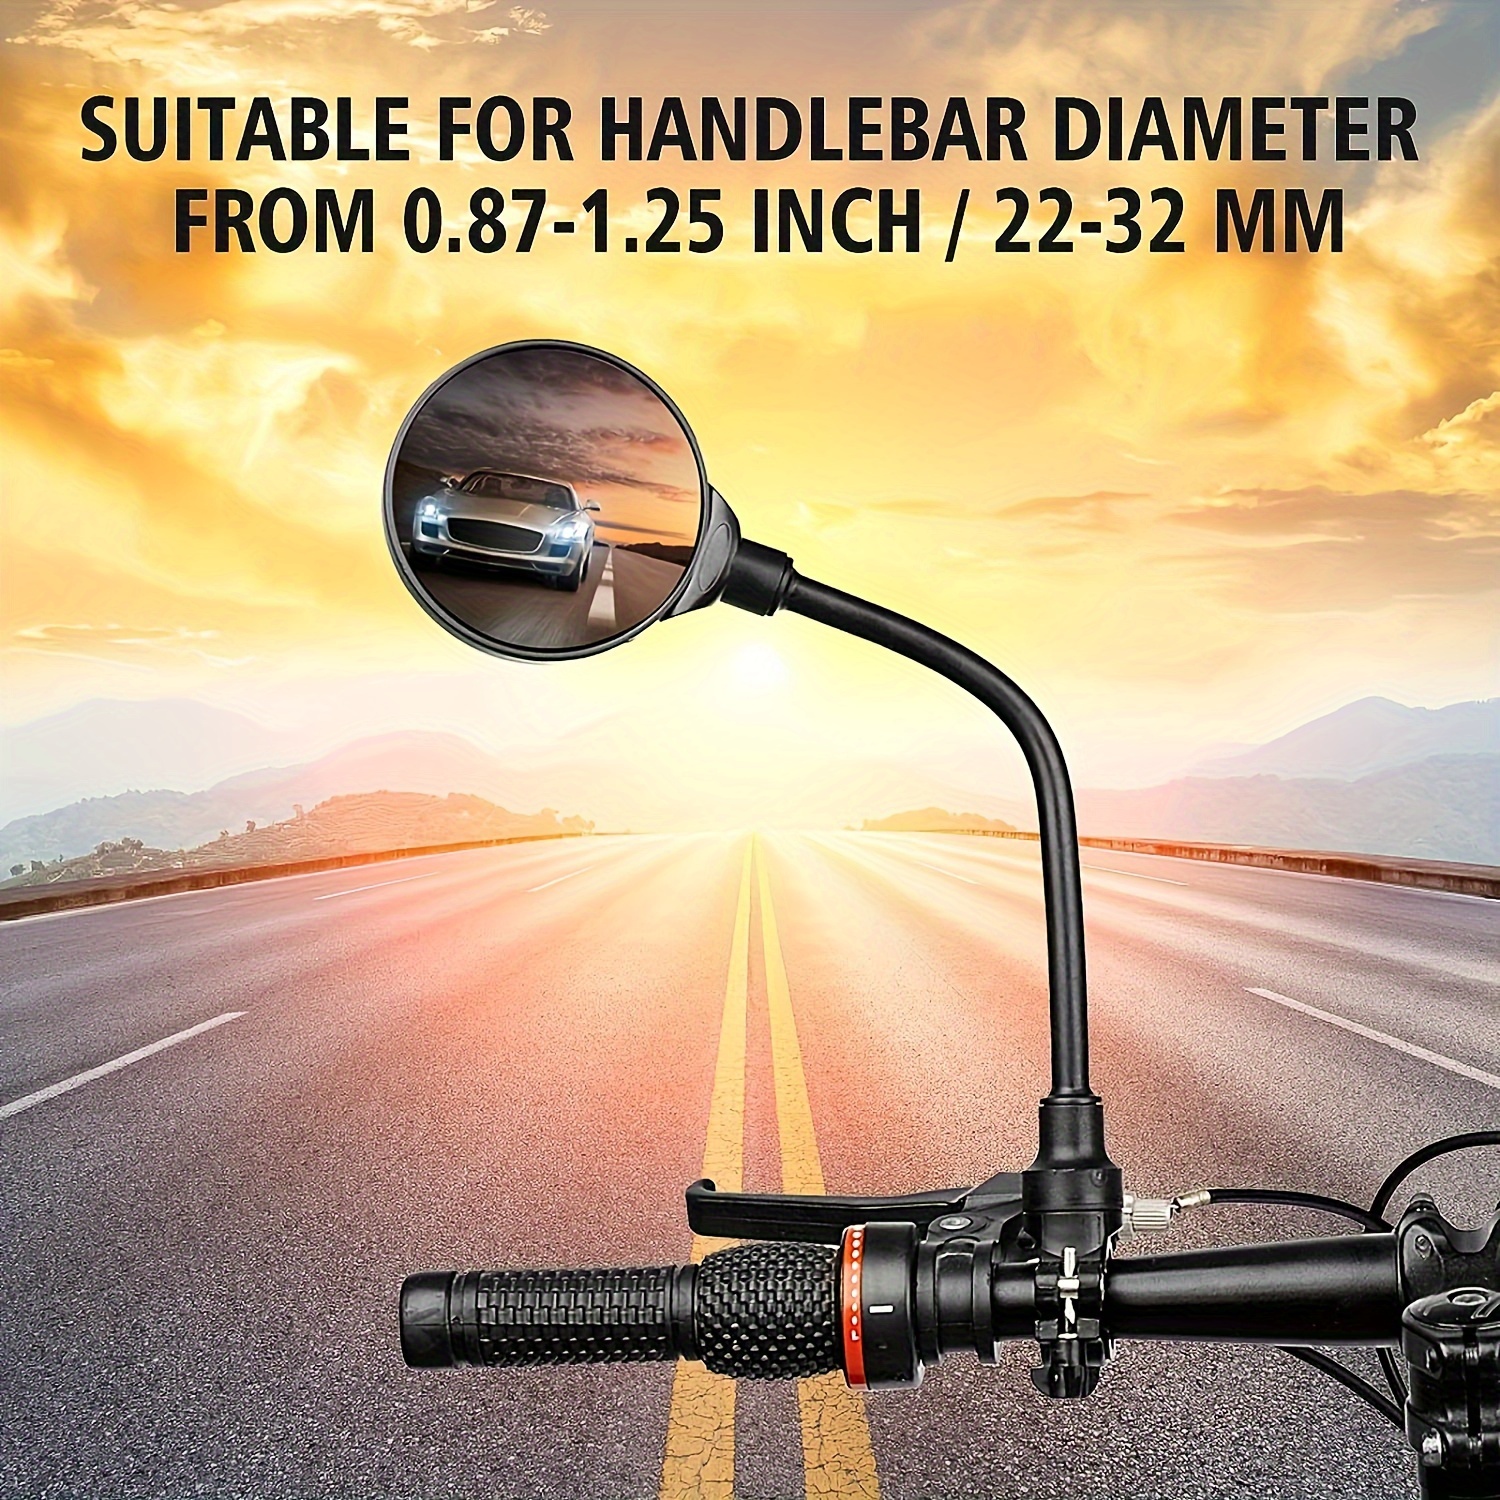 

1set/2sets Bike Rearview Mirrors, Adjustable & Rotatable Wide Angle Handlebar Mounted Mirrors For Bicycles, Easy Install Cycling Safety Accessories